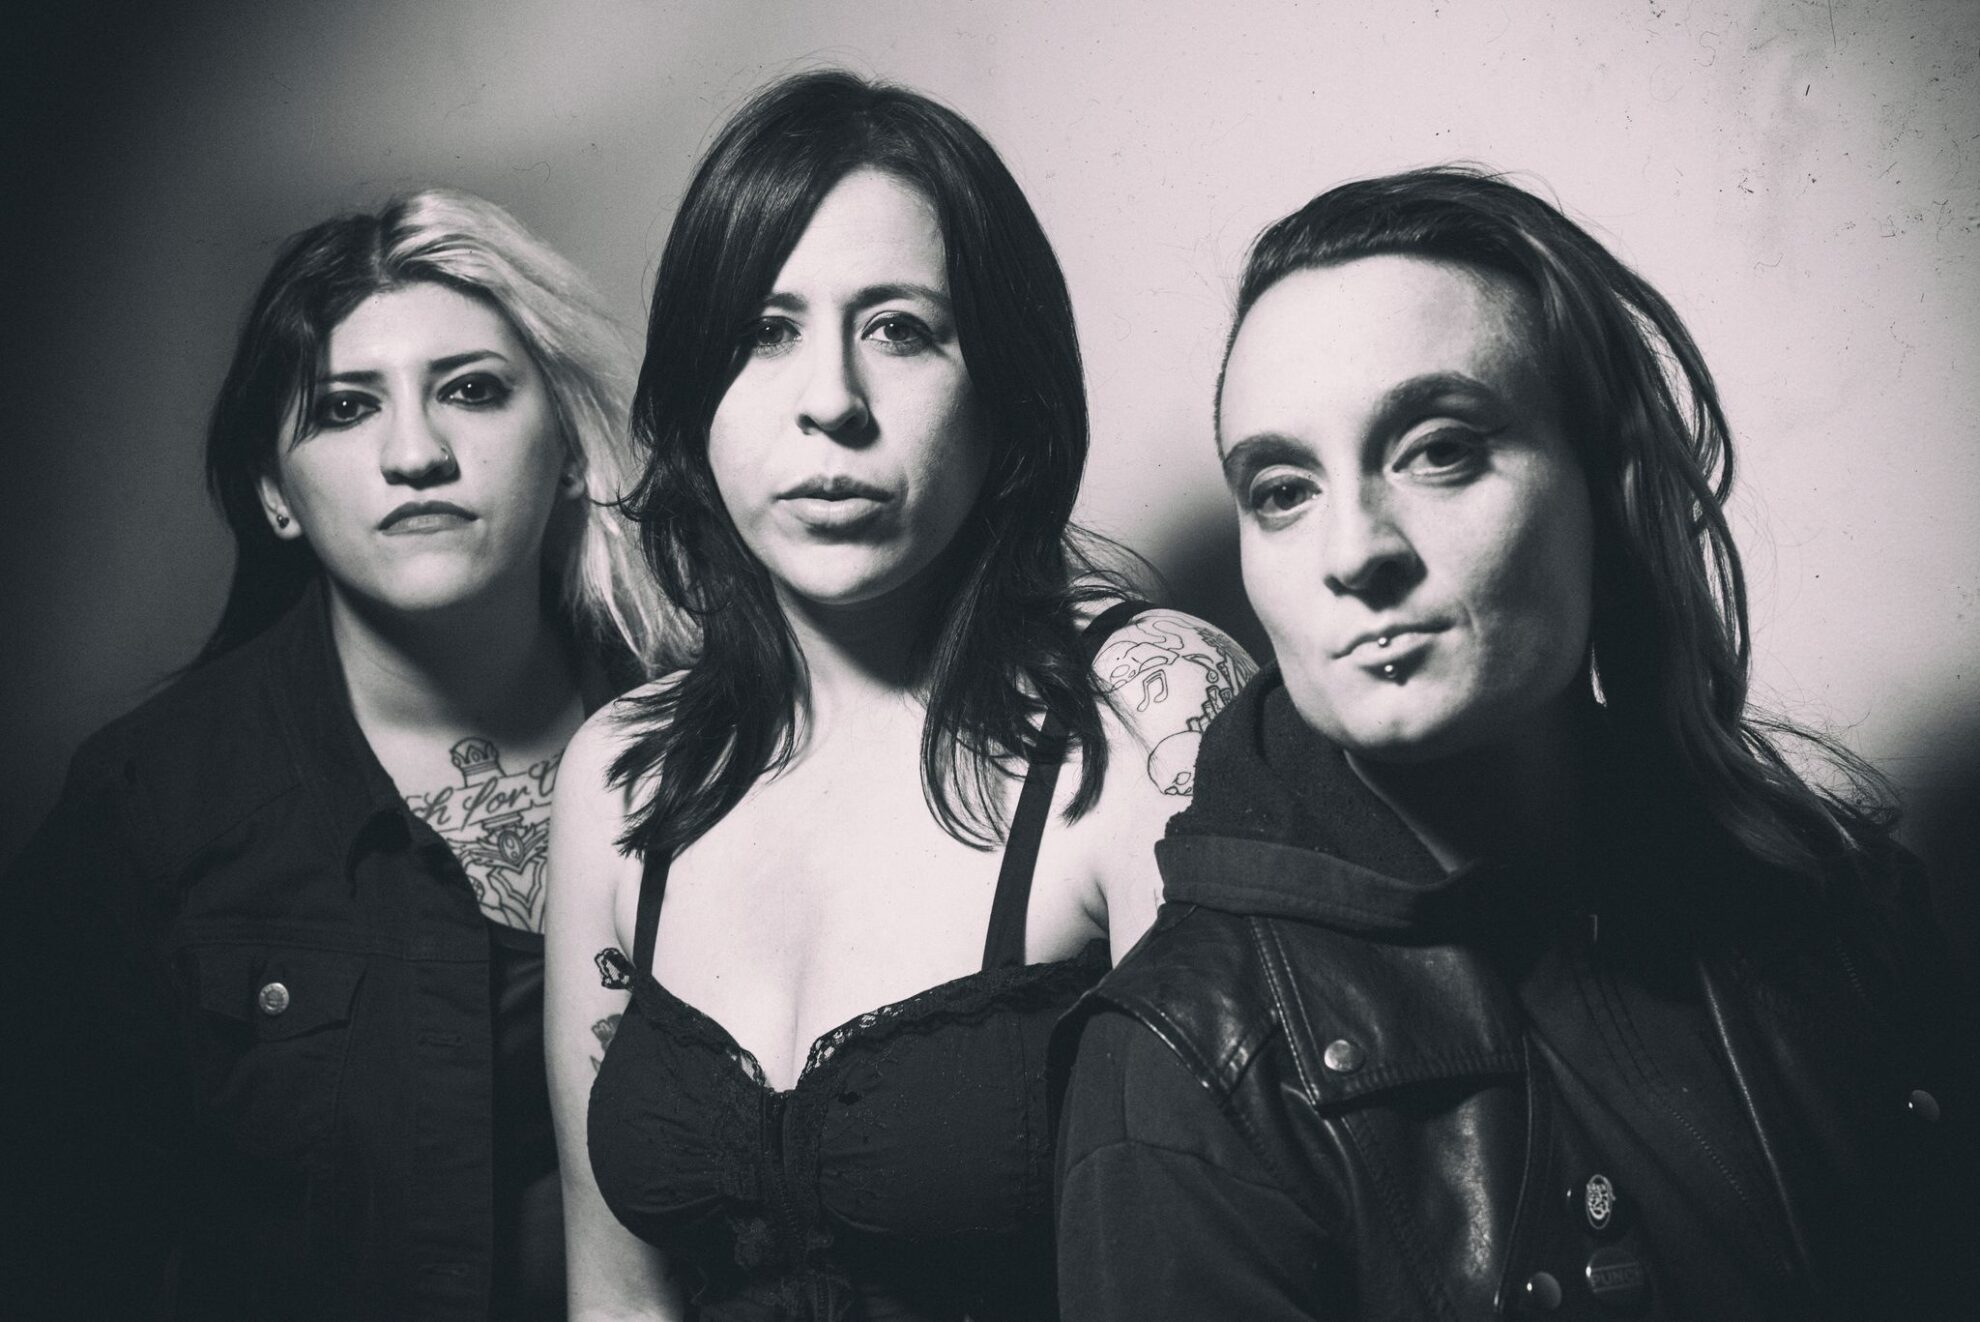 Black and white photo of the rock band The Venomous Pinks